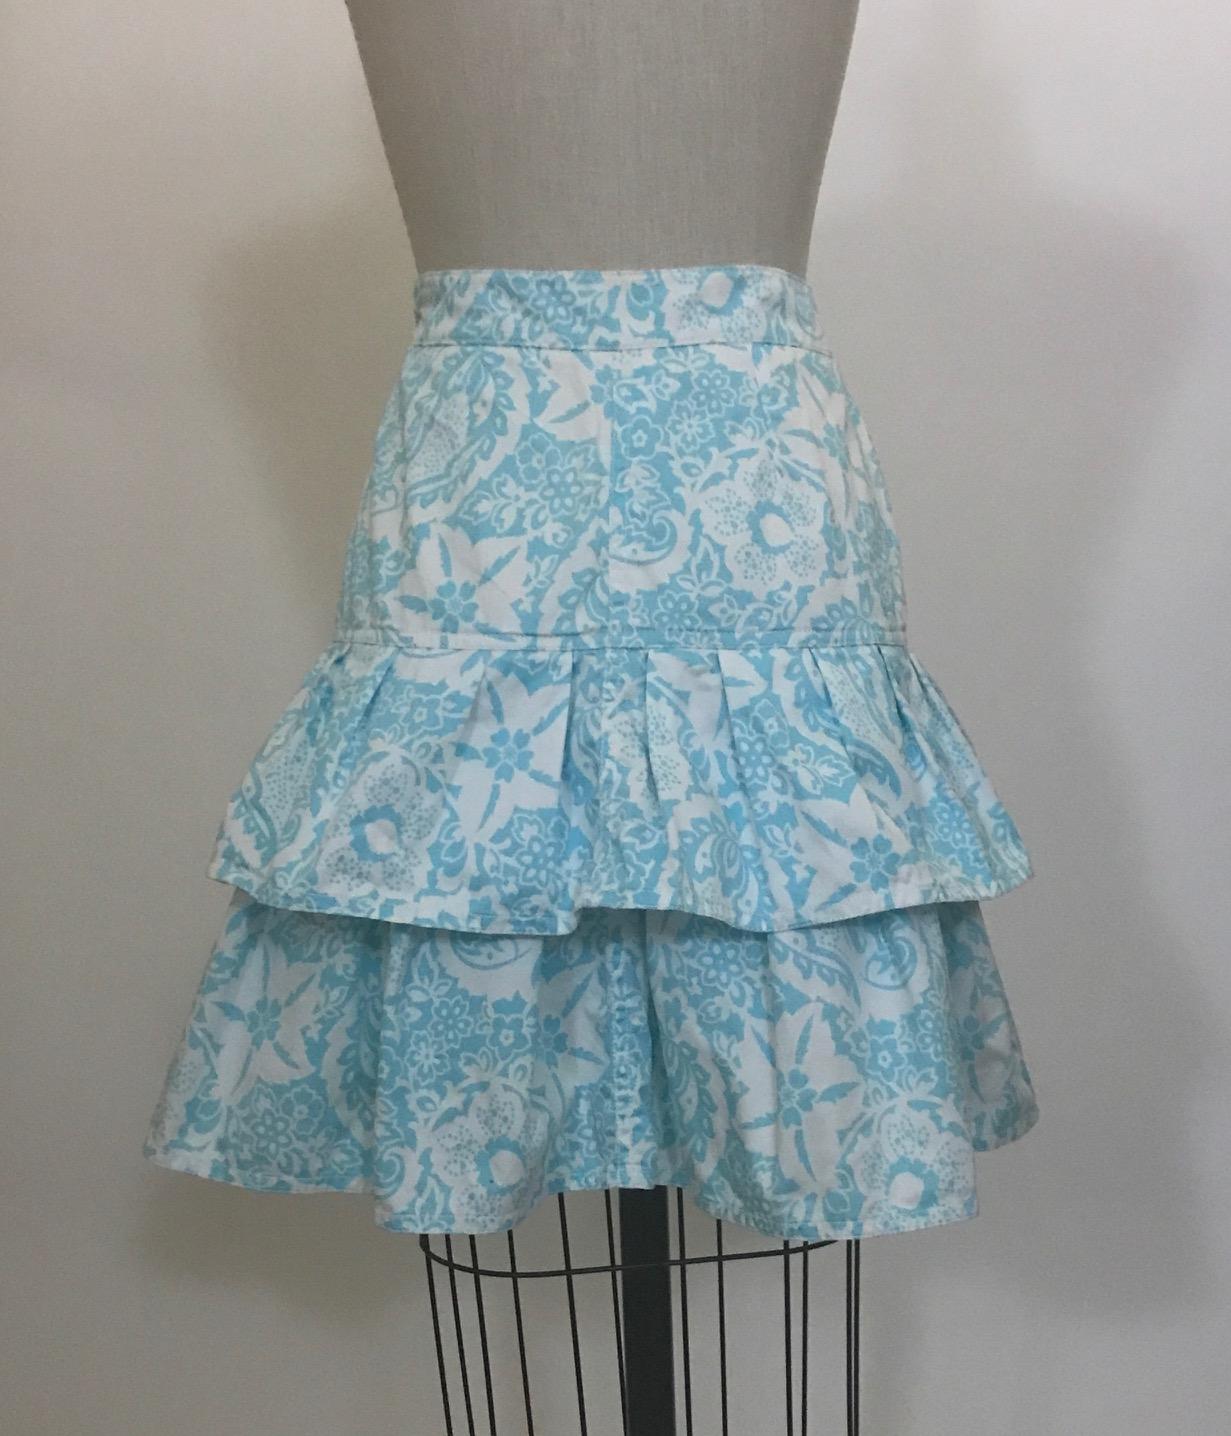 Oscar de la Renta for Neiman Marcus white and light blue paisley print skirt with tiered ruffles. Side zip and hook and eye.

100% (somewhat stiff) cotton.

Made in Italy.

Labelled size US 8, but runs a size or two small, see measurements.
Waist